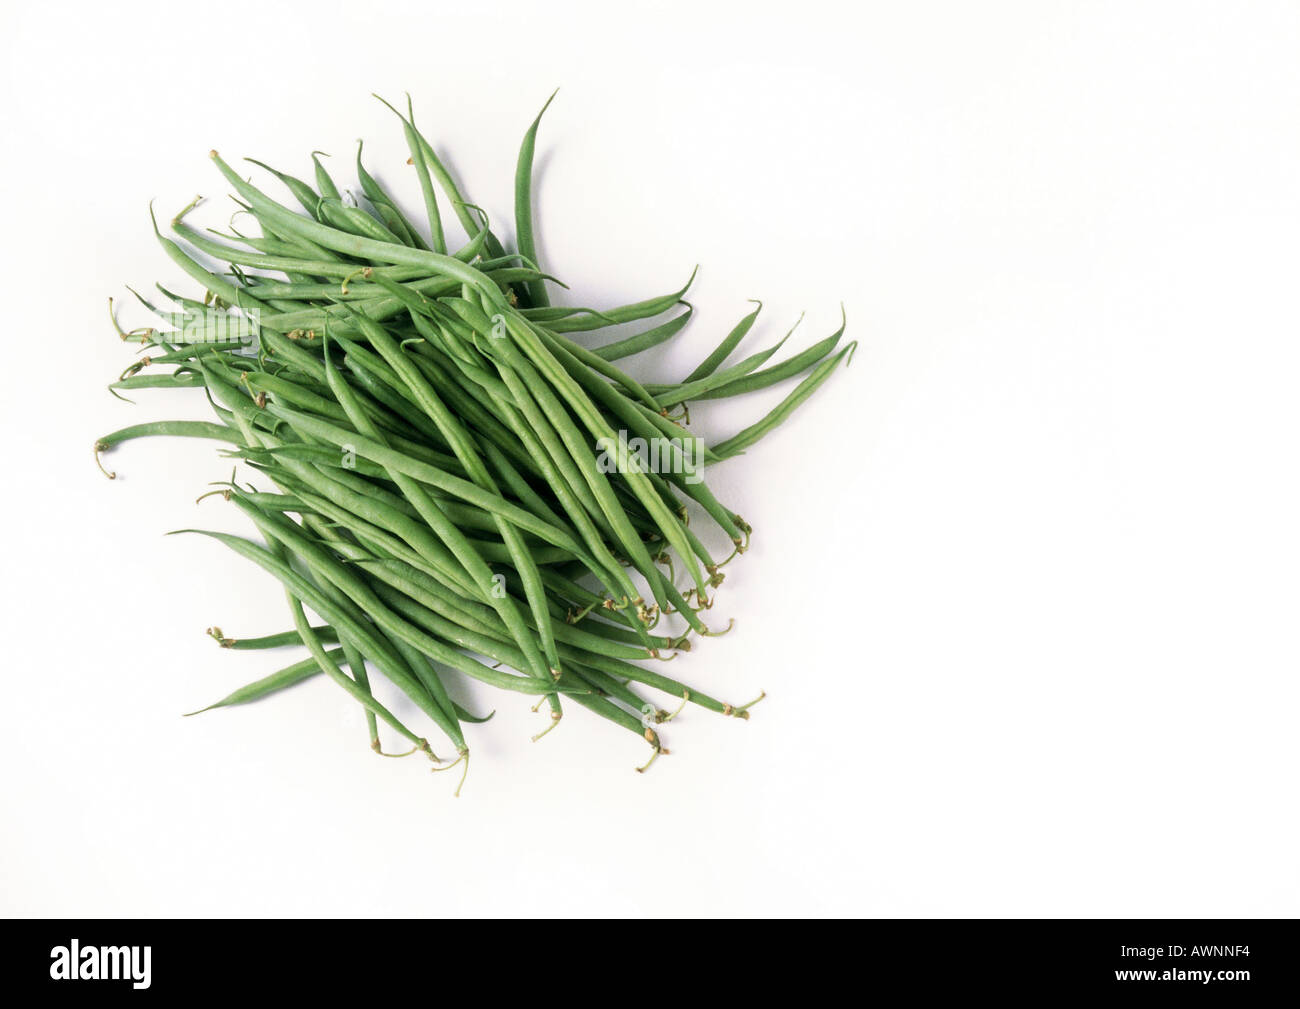 Pile of green string beans Stock Photo